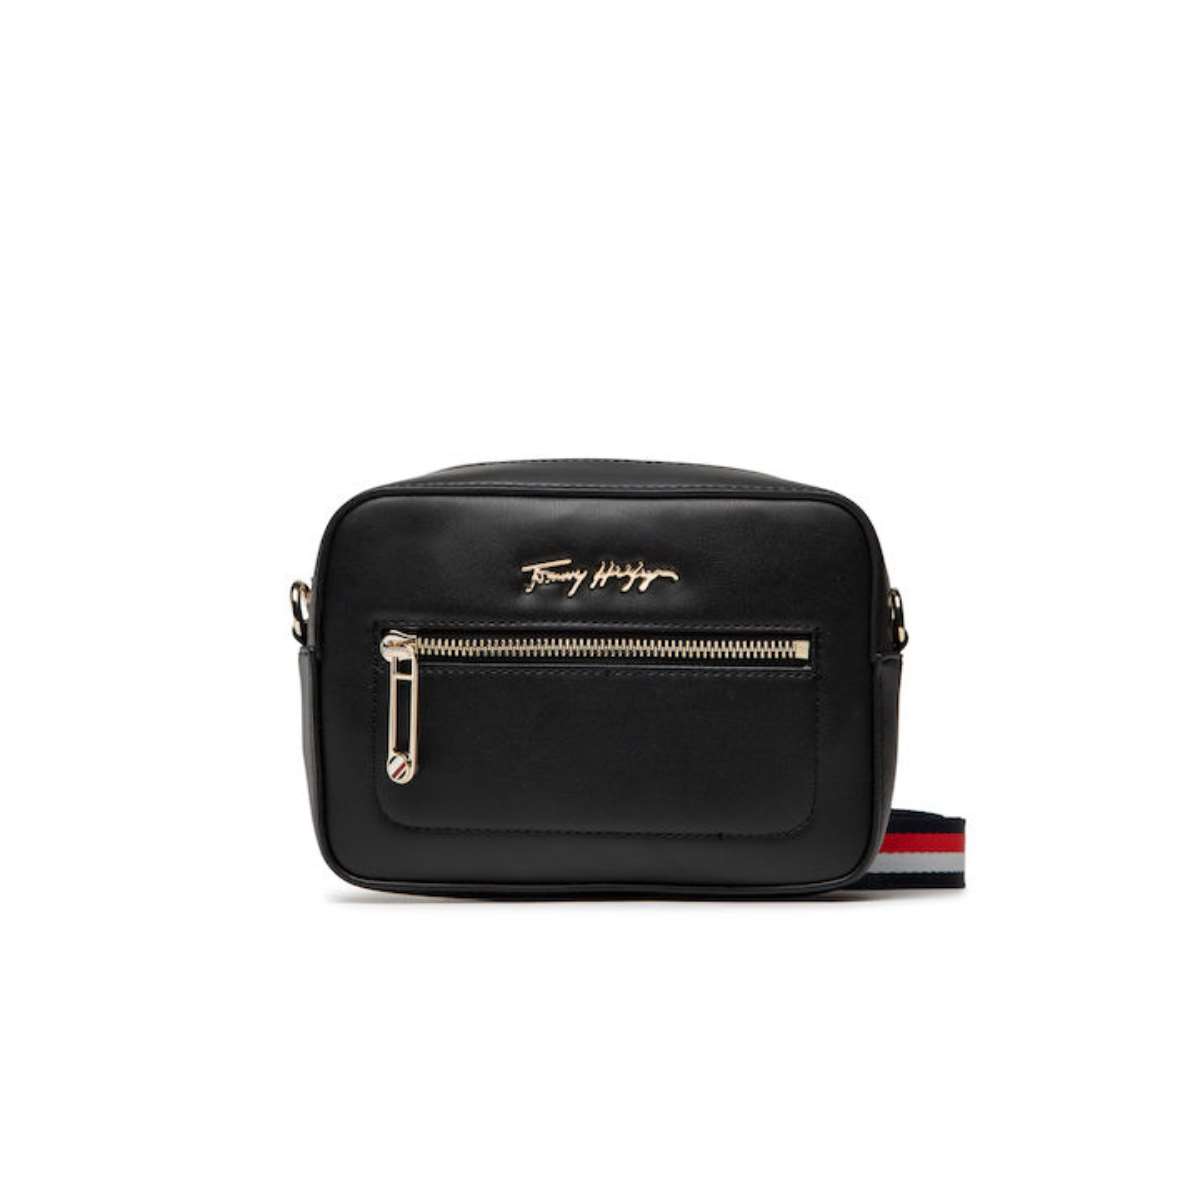 Huis Buskruit Meerdere Tommy Hilfiger AW0AW12184 Crossbody Bag - Beauty & Beyond